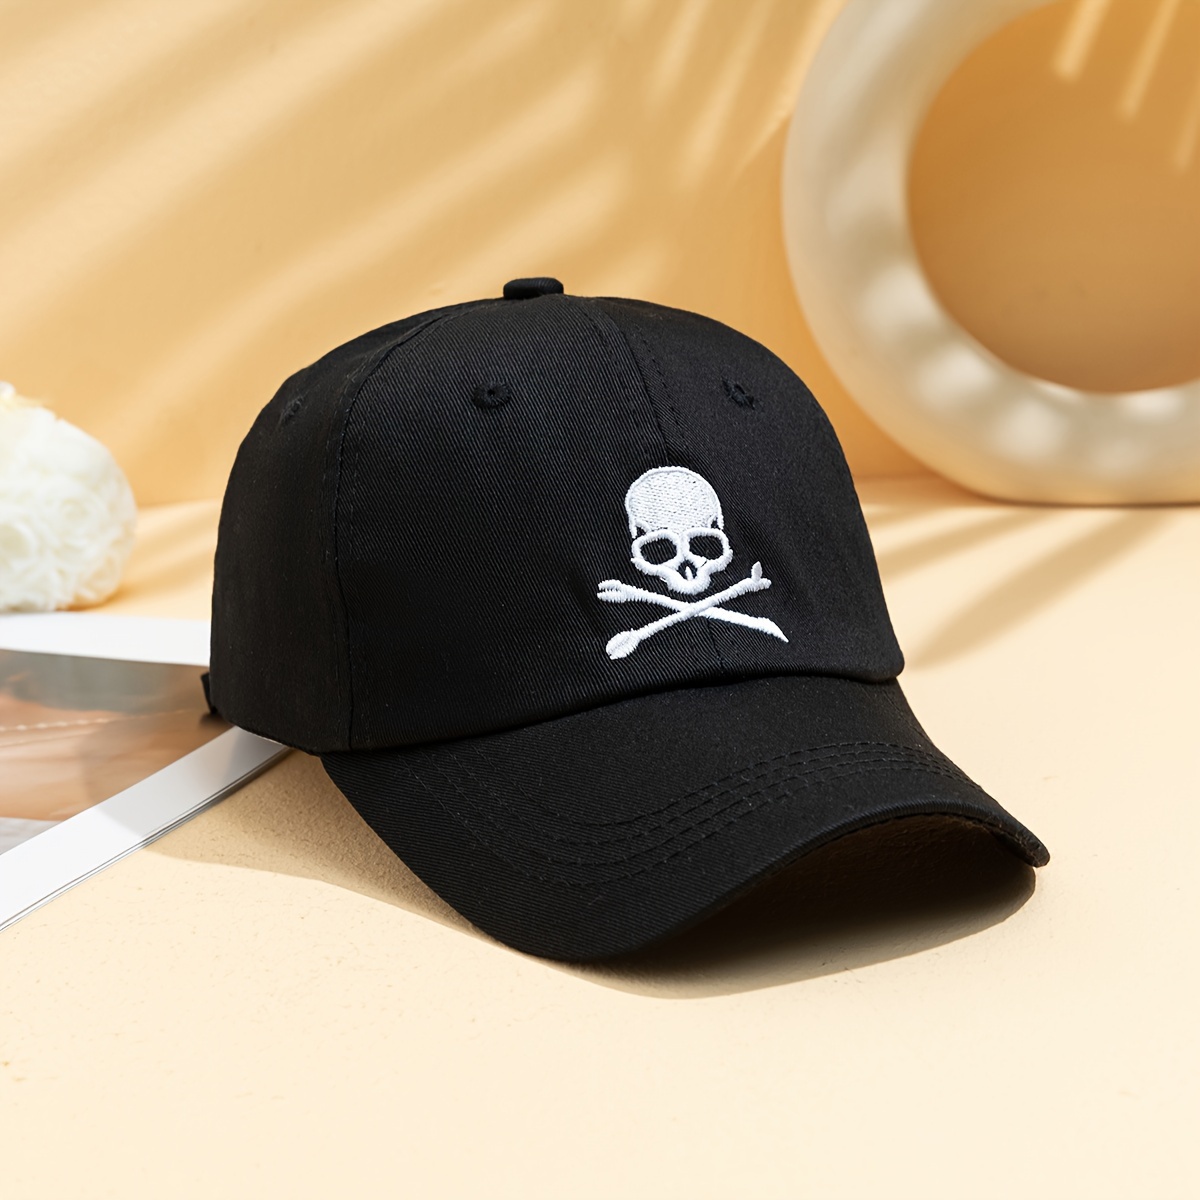 

1pc Unisex Sunshade Retro Washed Baseball Cap With Skull Pattern For Outdoor Sport, Golf, Fishing